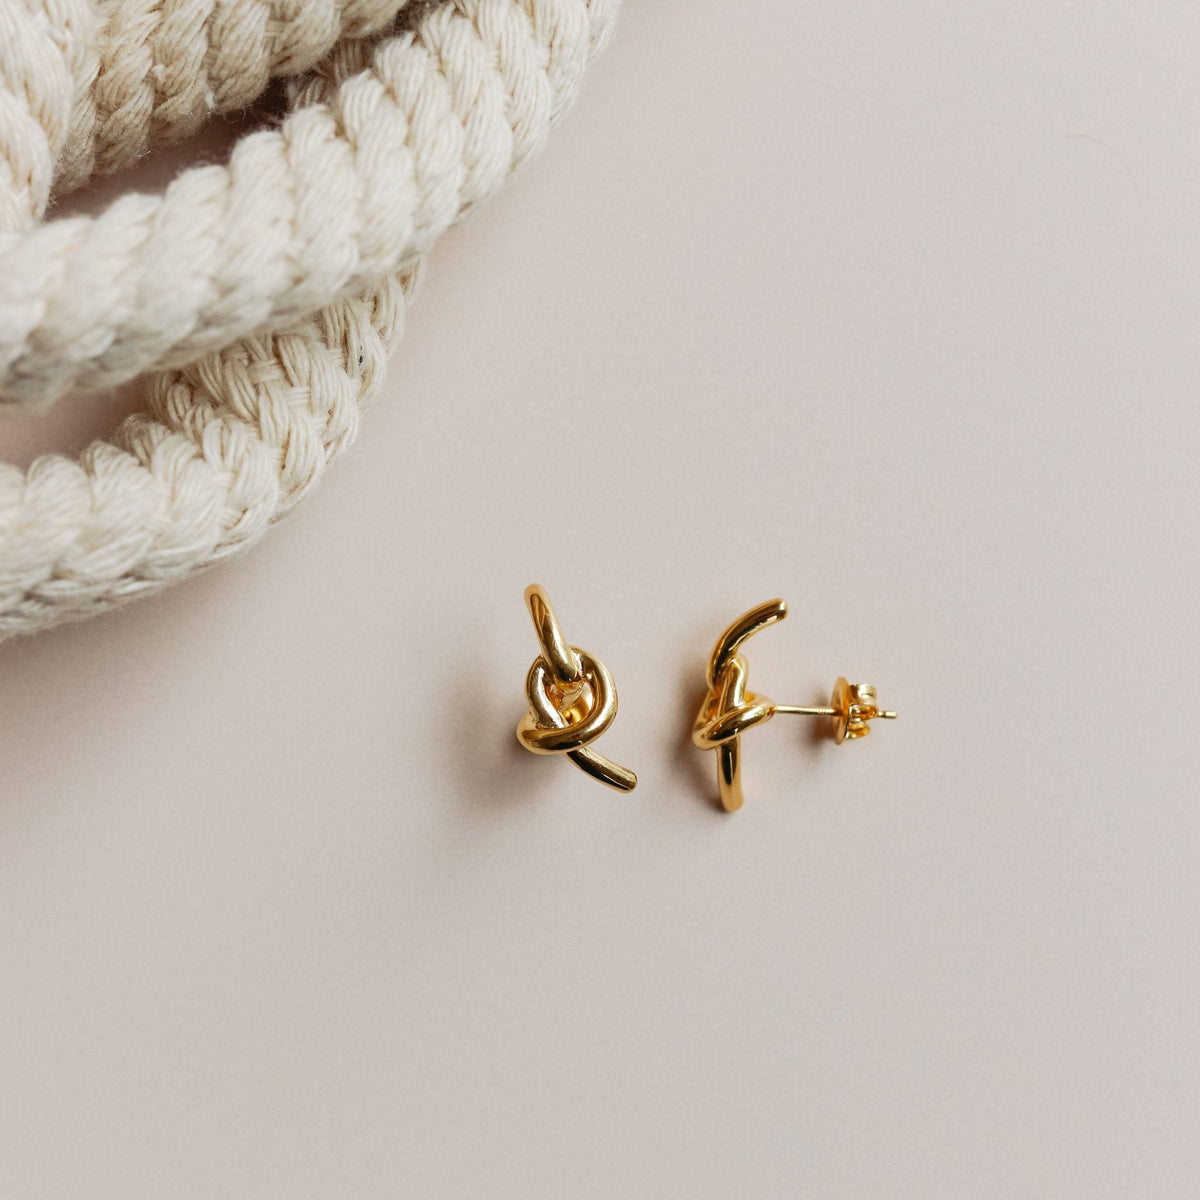 POISE KNOT STUDS - GOLD - SO PRETTY CARA COTTER